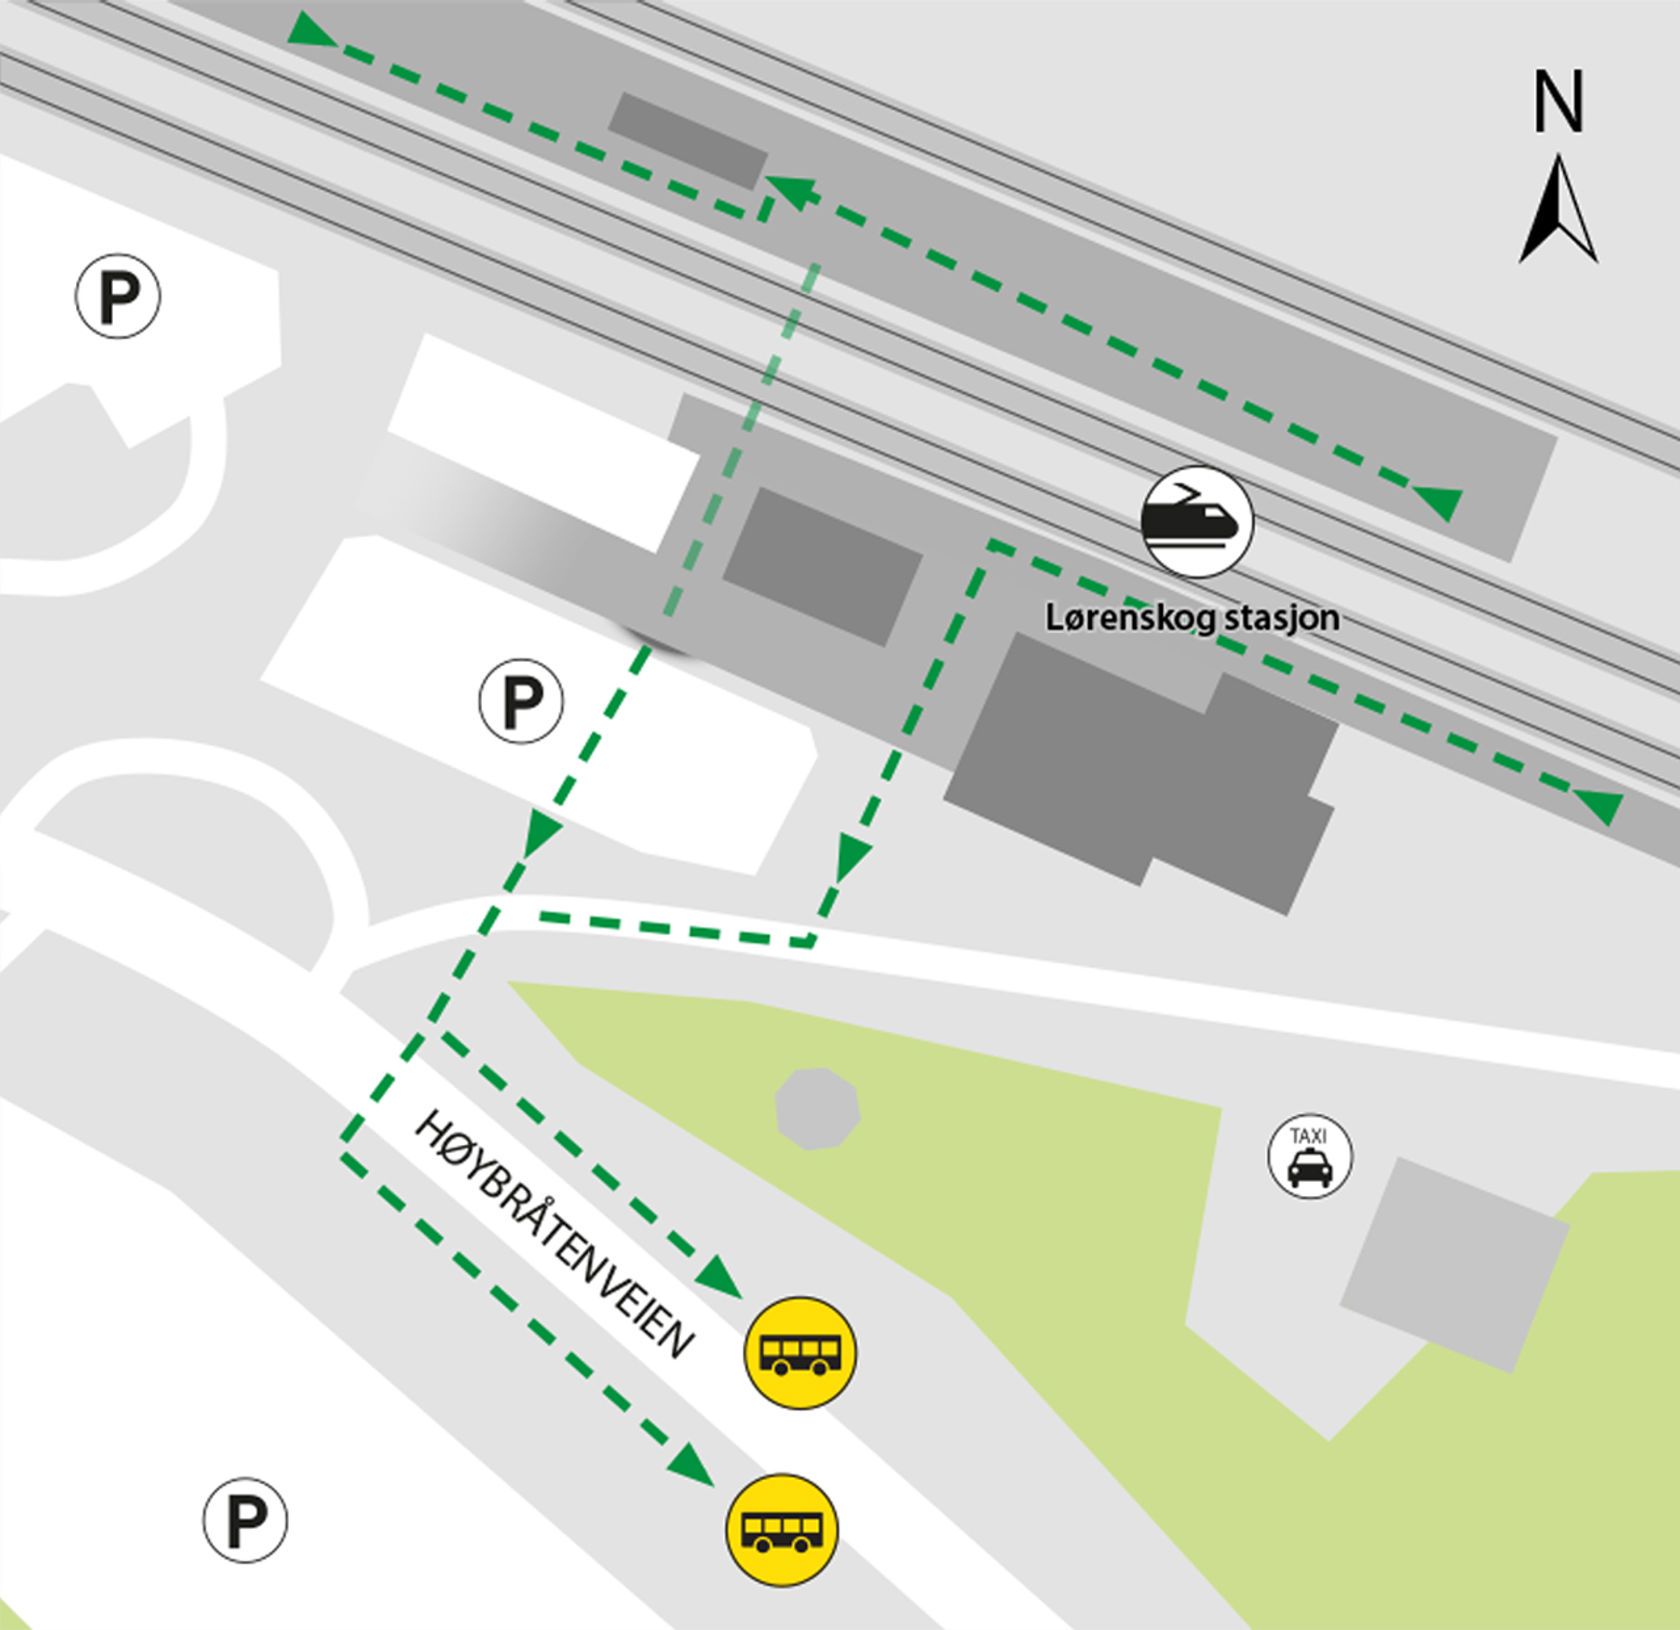 Map shows rail replacement service departs from Lørenskog station bus stops